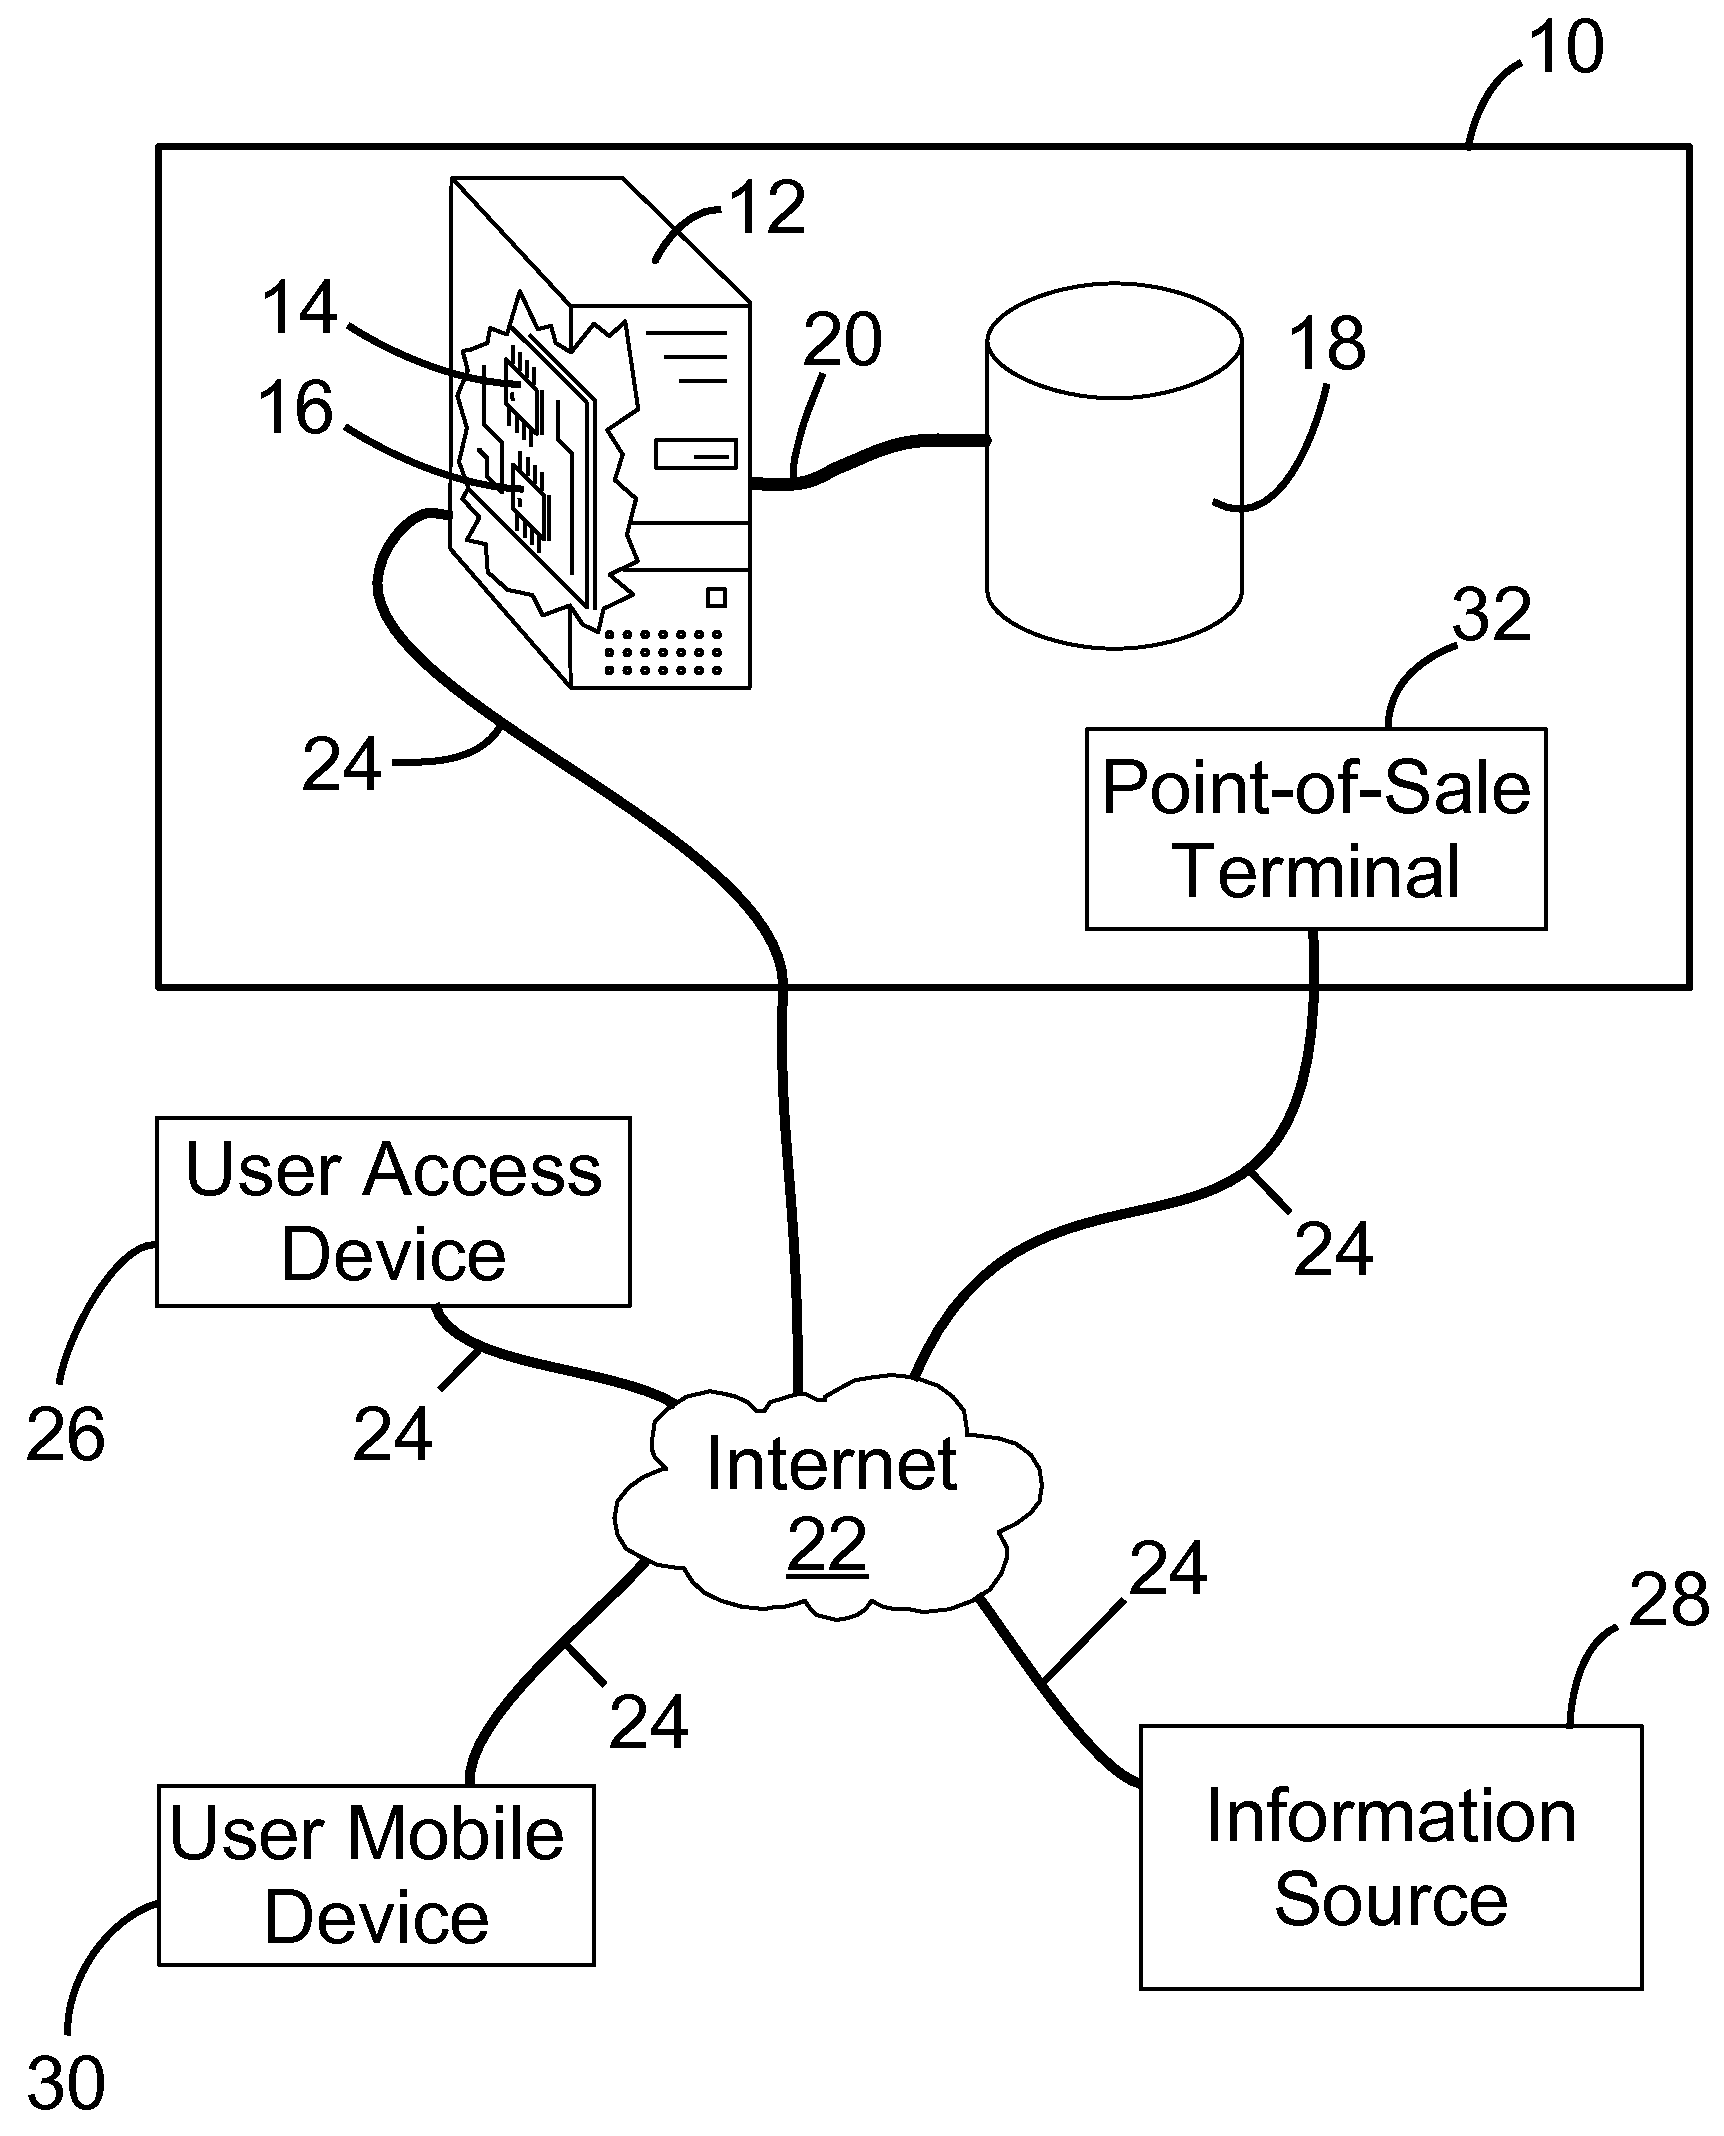 Method and system for managing personal and financial information